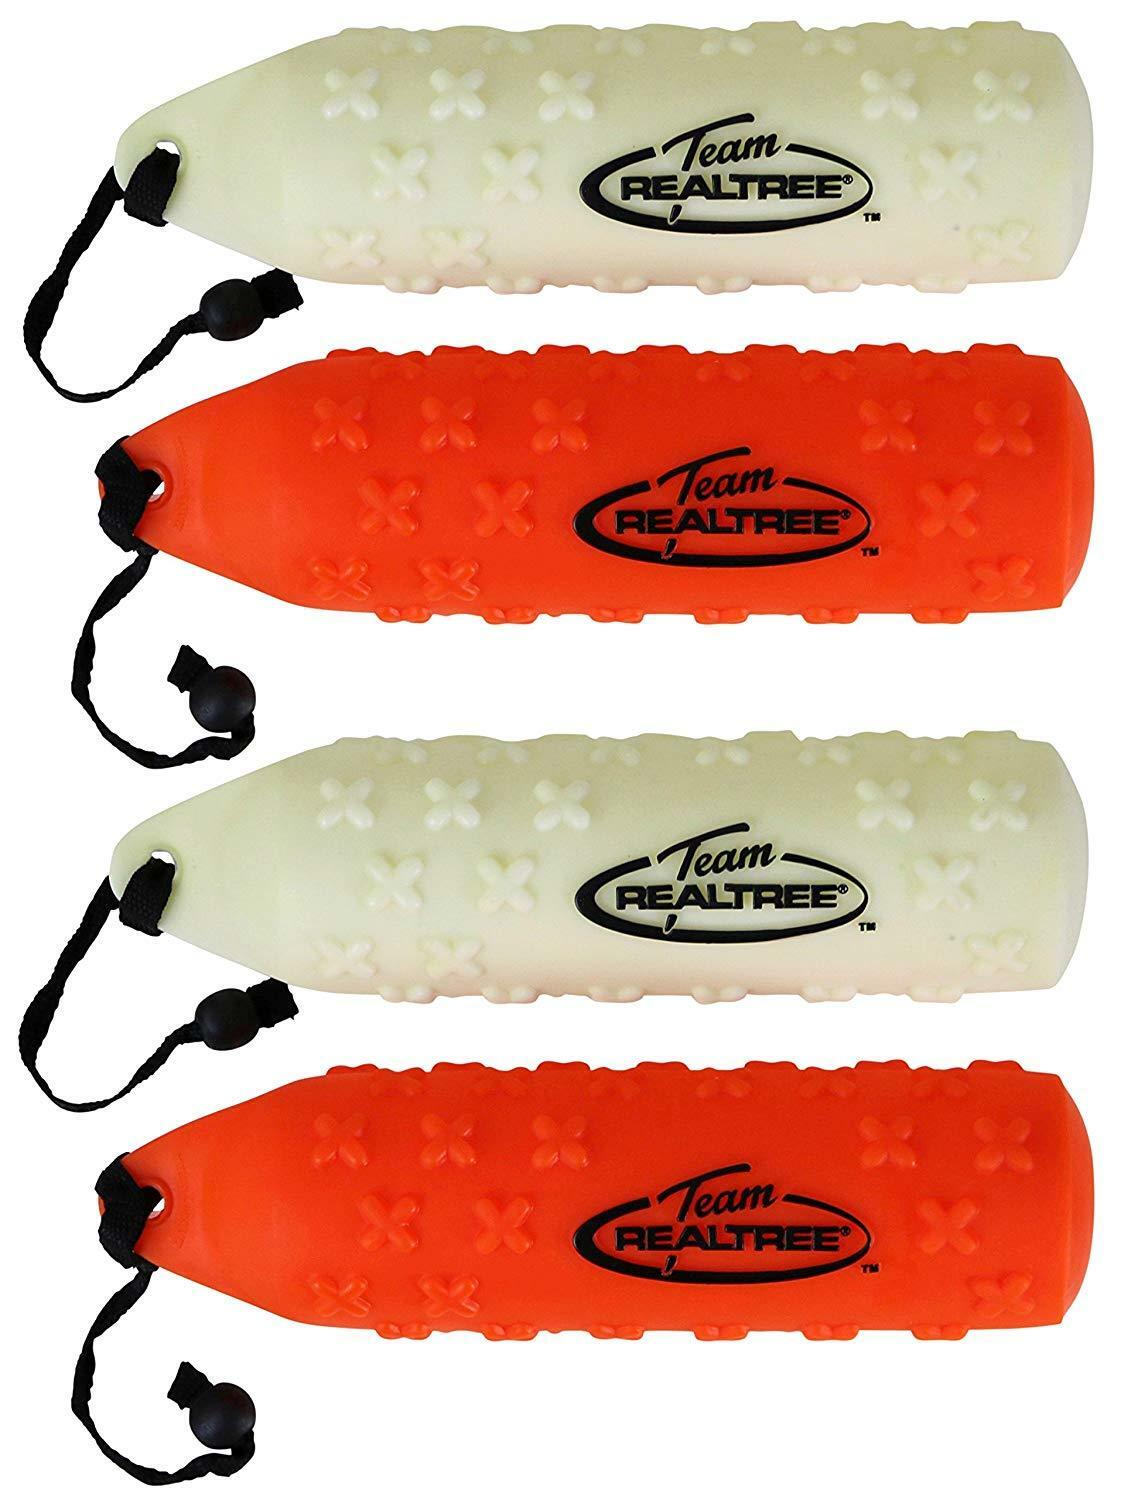 4-pk Large Realtree Dog Rubber Hunting Training Dummies Floatable Retriever Toy